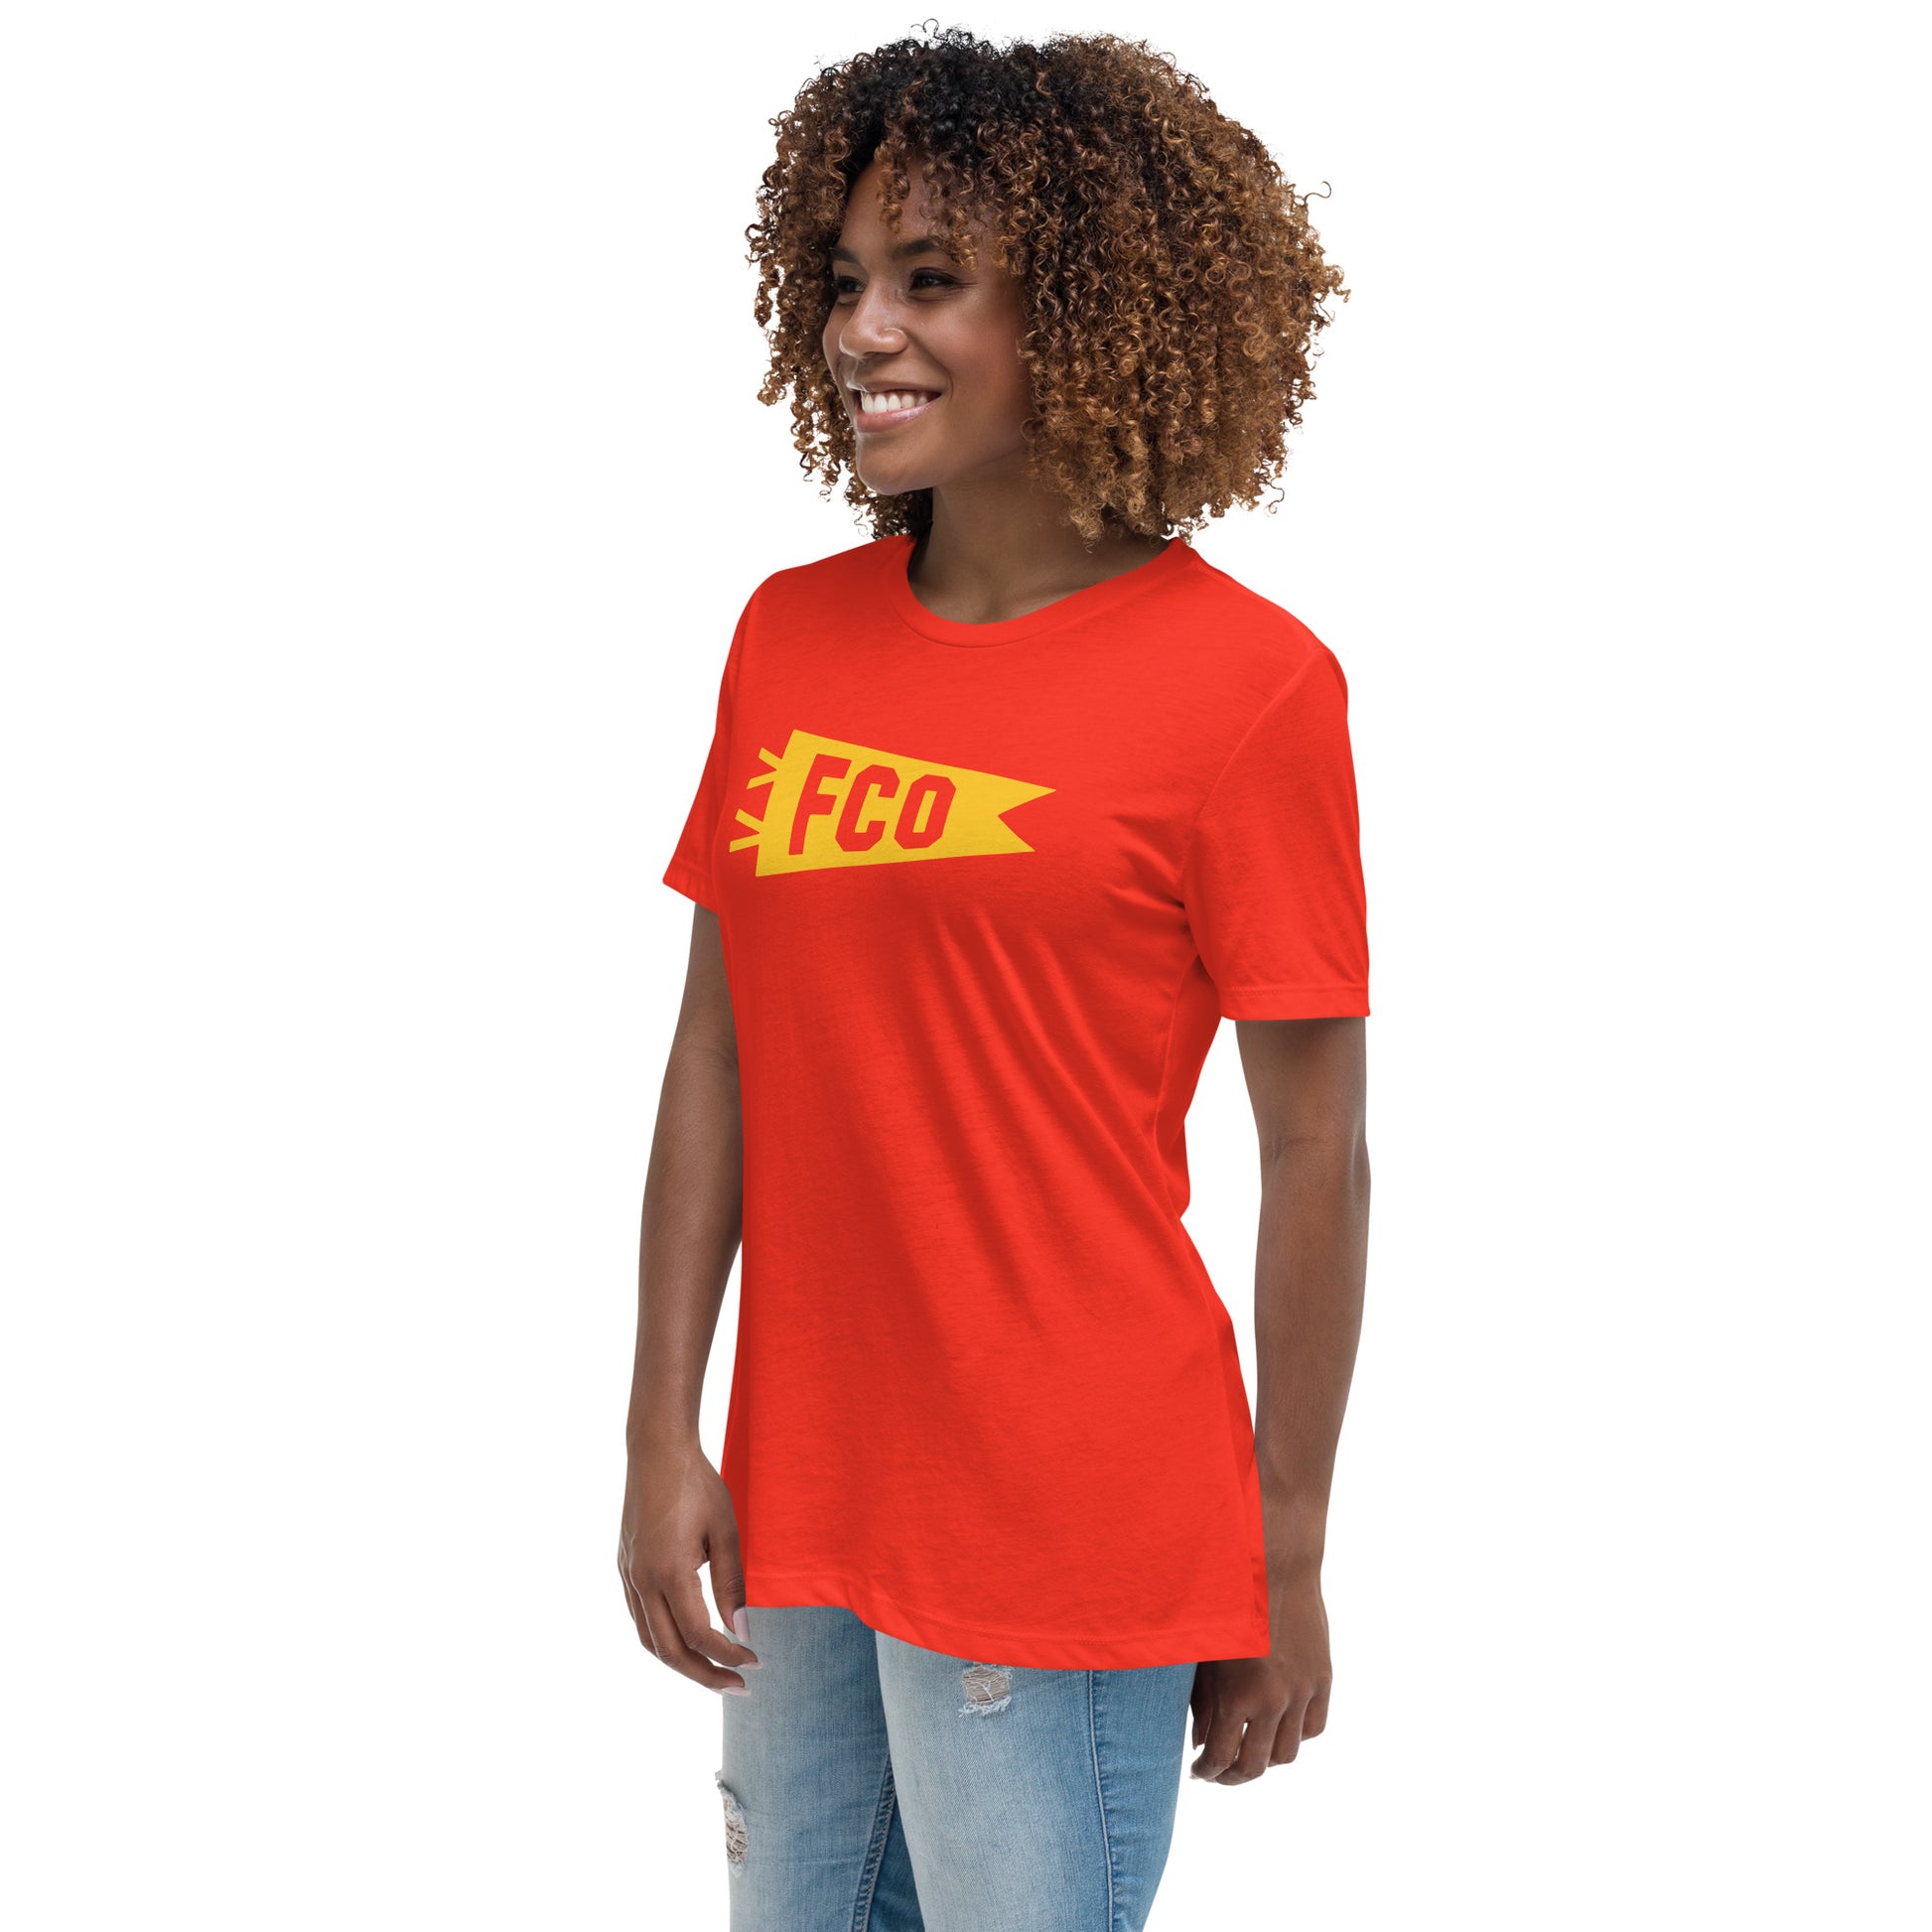 Airport Code Women's Tee - Yellow Graphic • FCO Rome • YHM Designs - Image 04